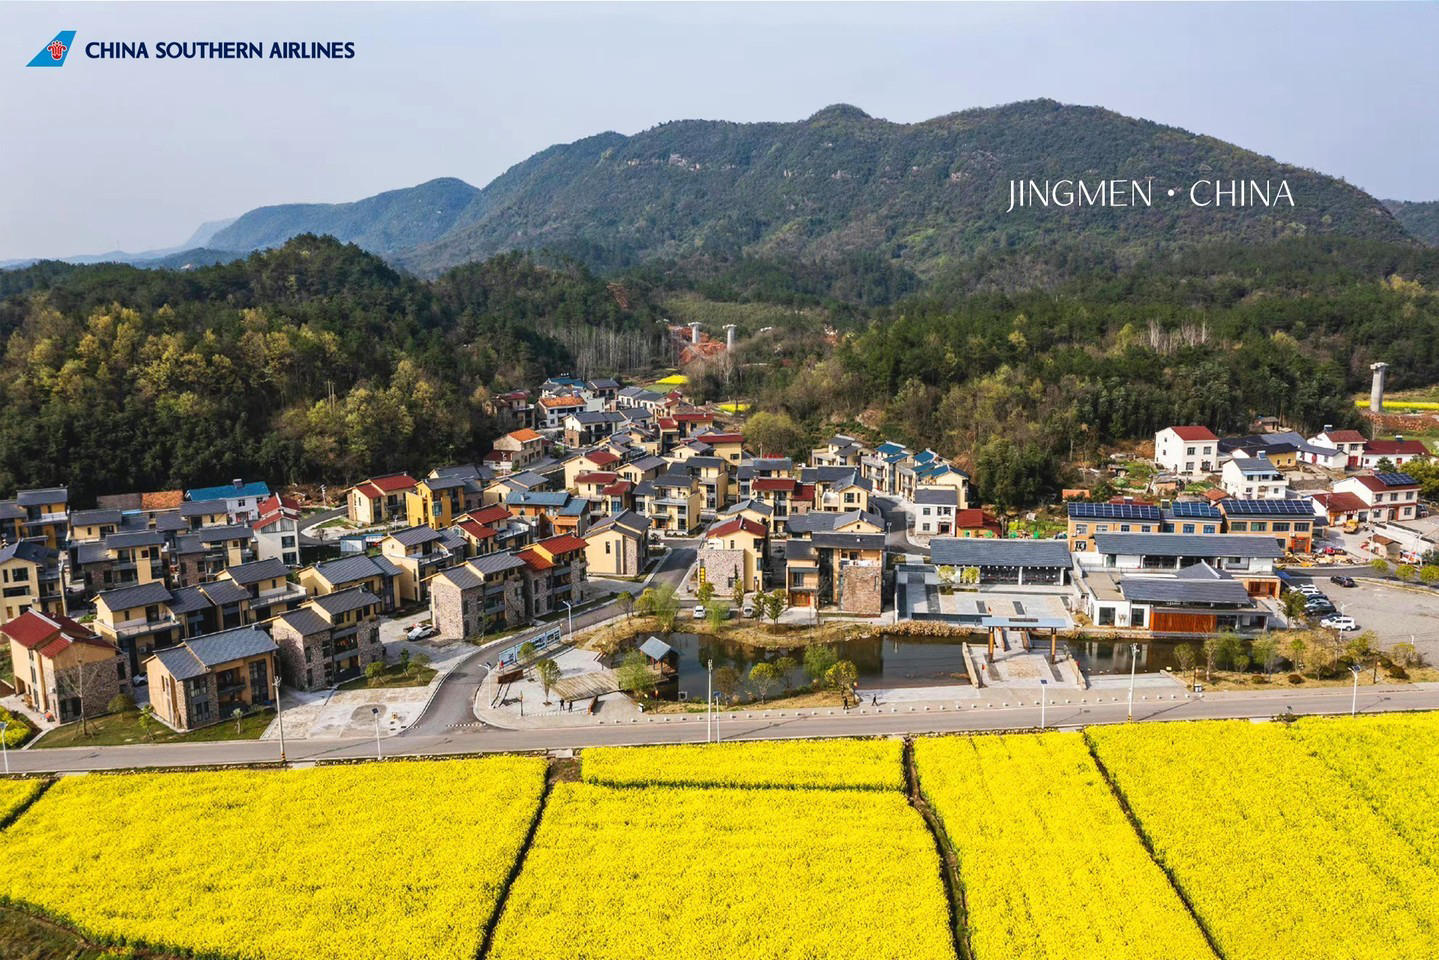 image  1 China Southern Airlines - #Jingmen is known for its unique culture and history, making it a must-see